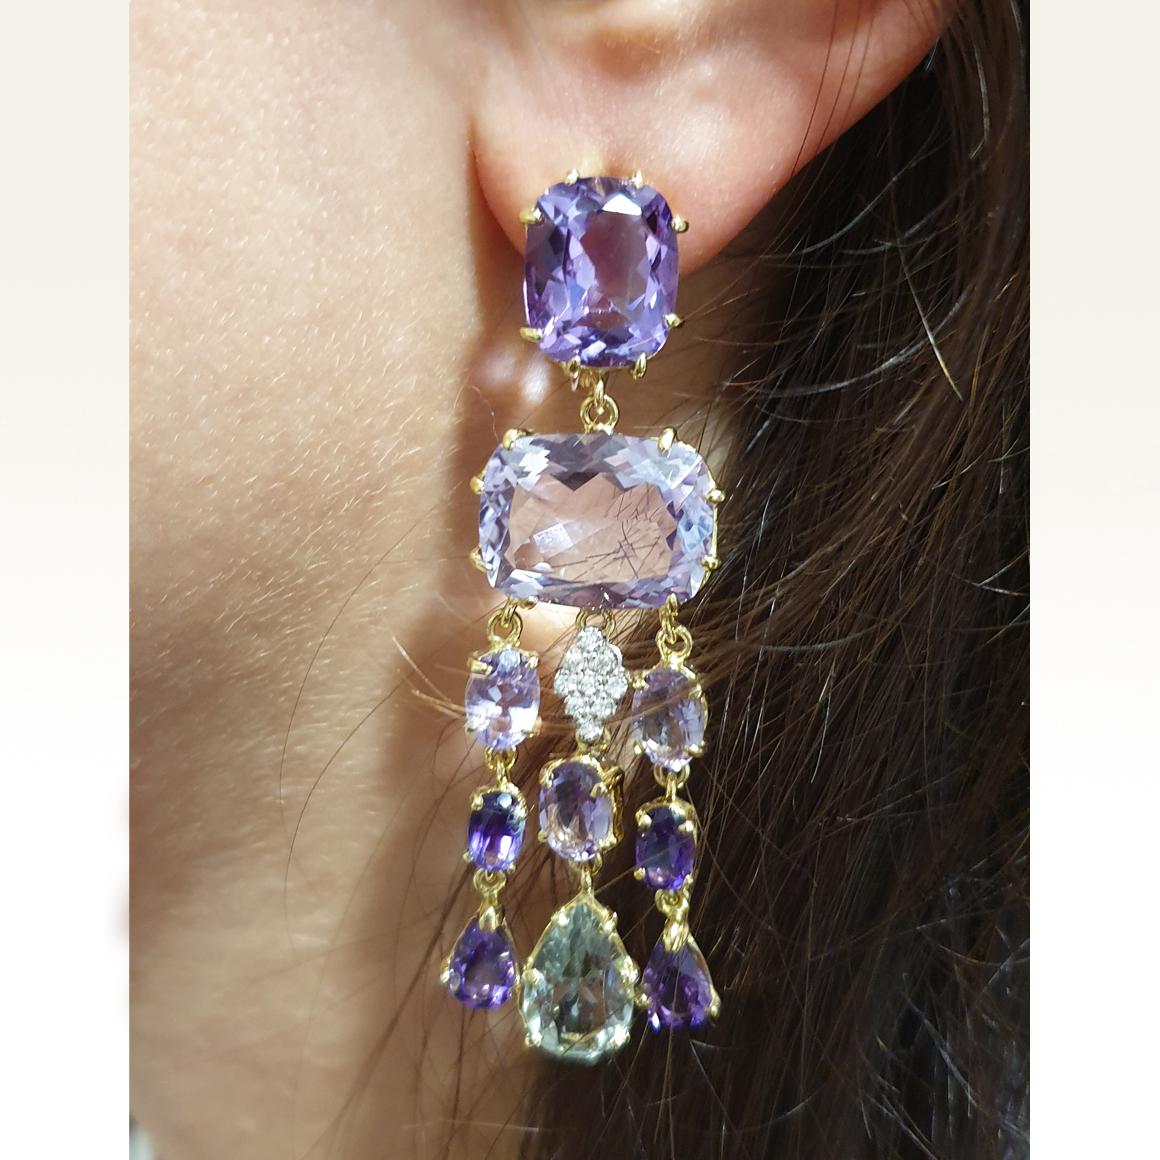  The delicate colors make this jewel unique! Combination of light and dark amethyst made a perfet earrings in yellow gold made in Italy by Stanoppi Jewellery since 1948.
Earrings in 18k yellow and white gold with Amethyst (rectangular cut, size: